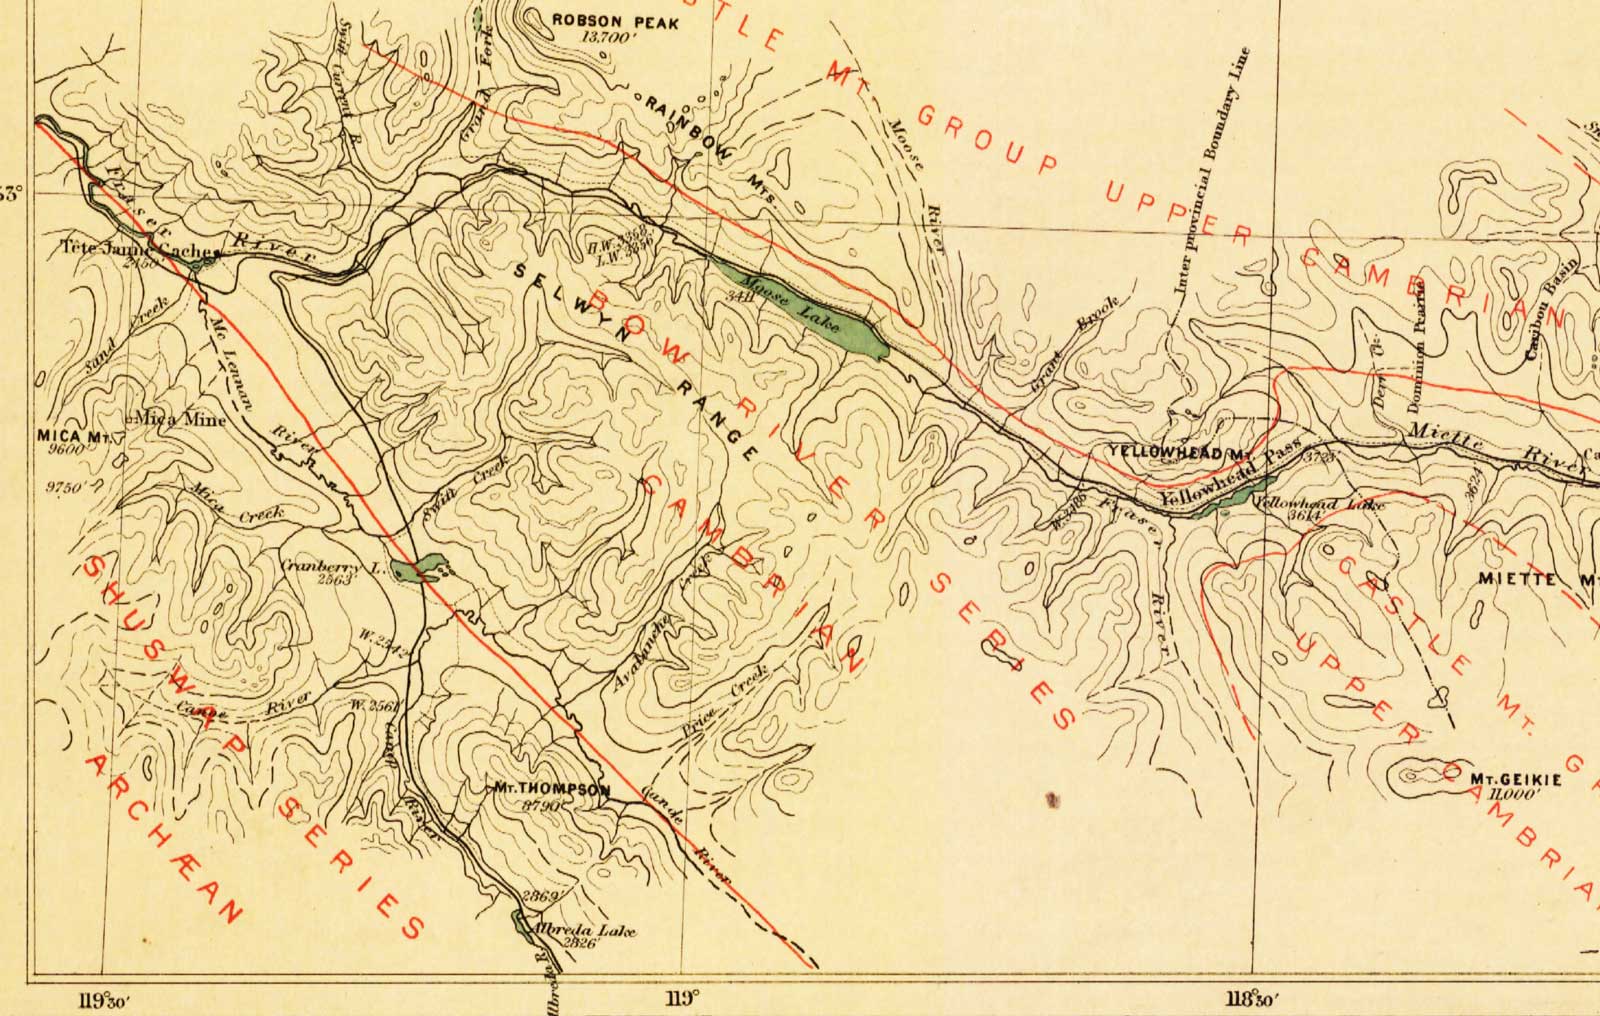 Map Showing Yellowhead Pass Route From Edmonton To Tête-Jaune Cache. 
James McEvoy, 1900. (Detail of Yellowhead Pass to Tête Jaune Cache)